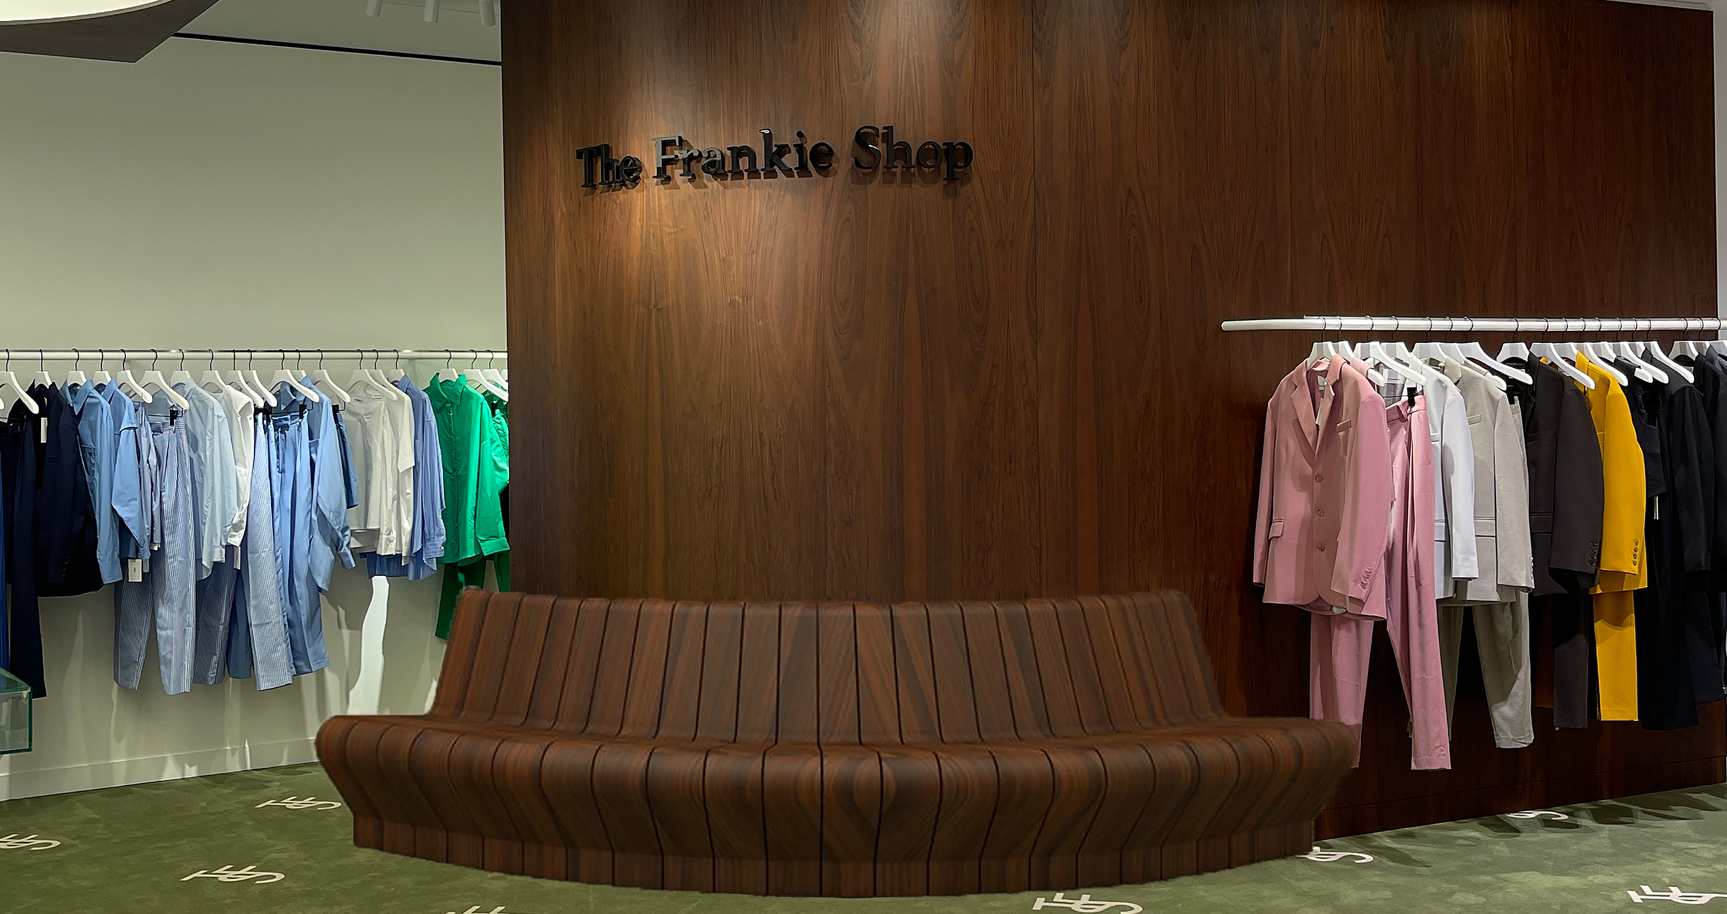 A view of the Frankie Shop Lafayette space.